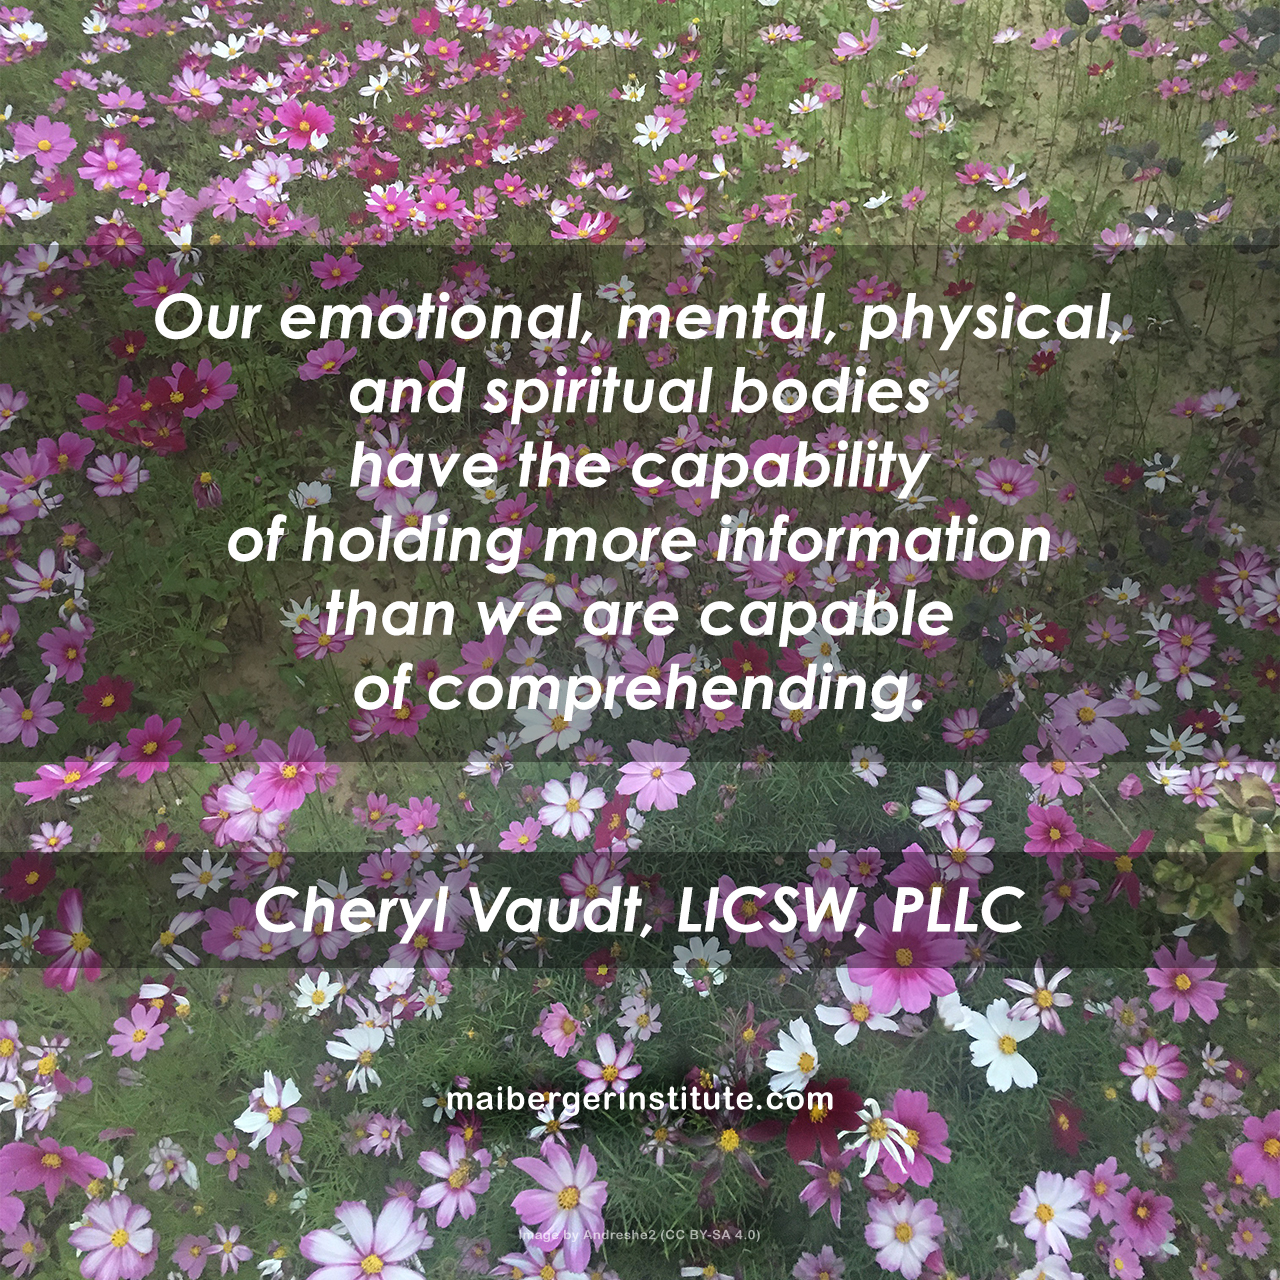 Our emotional, mental, physical, and spiritual bodies have the capability of holding more information than we are capable of comprehending. ~ Cheryl Vaudt, LICSW, PLCC